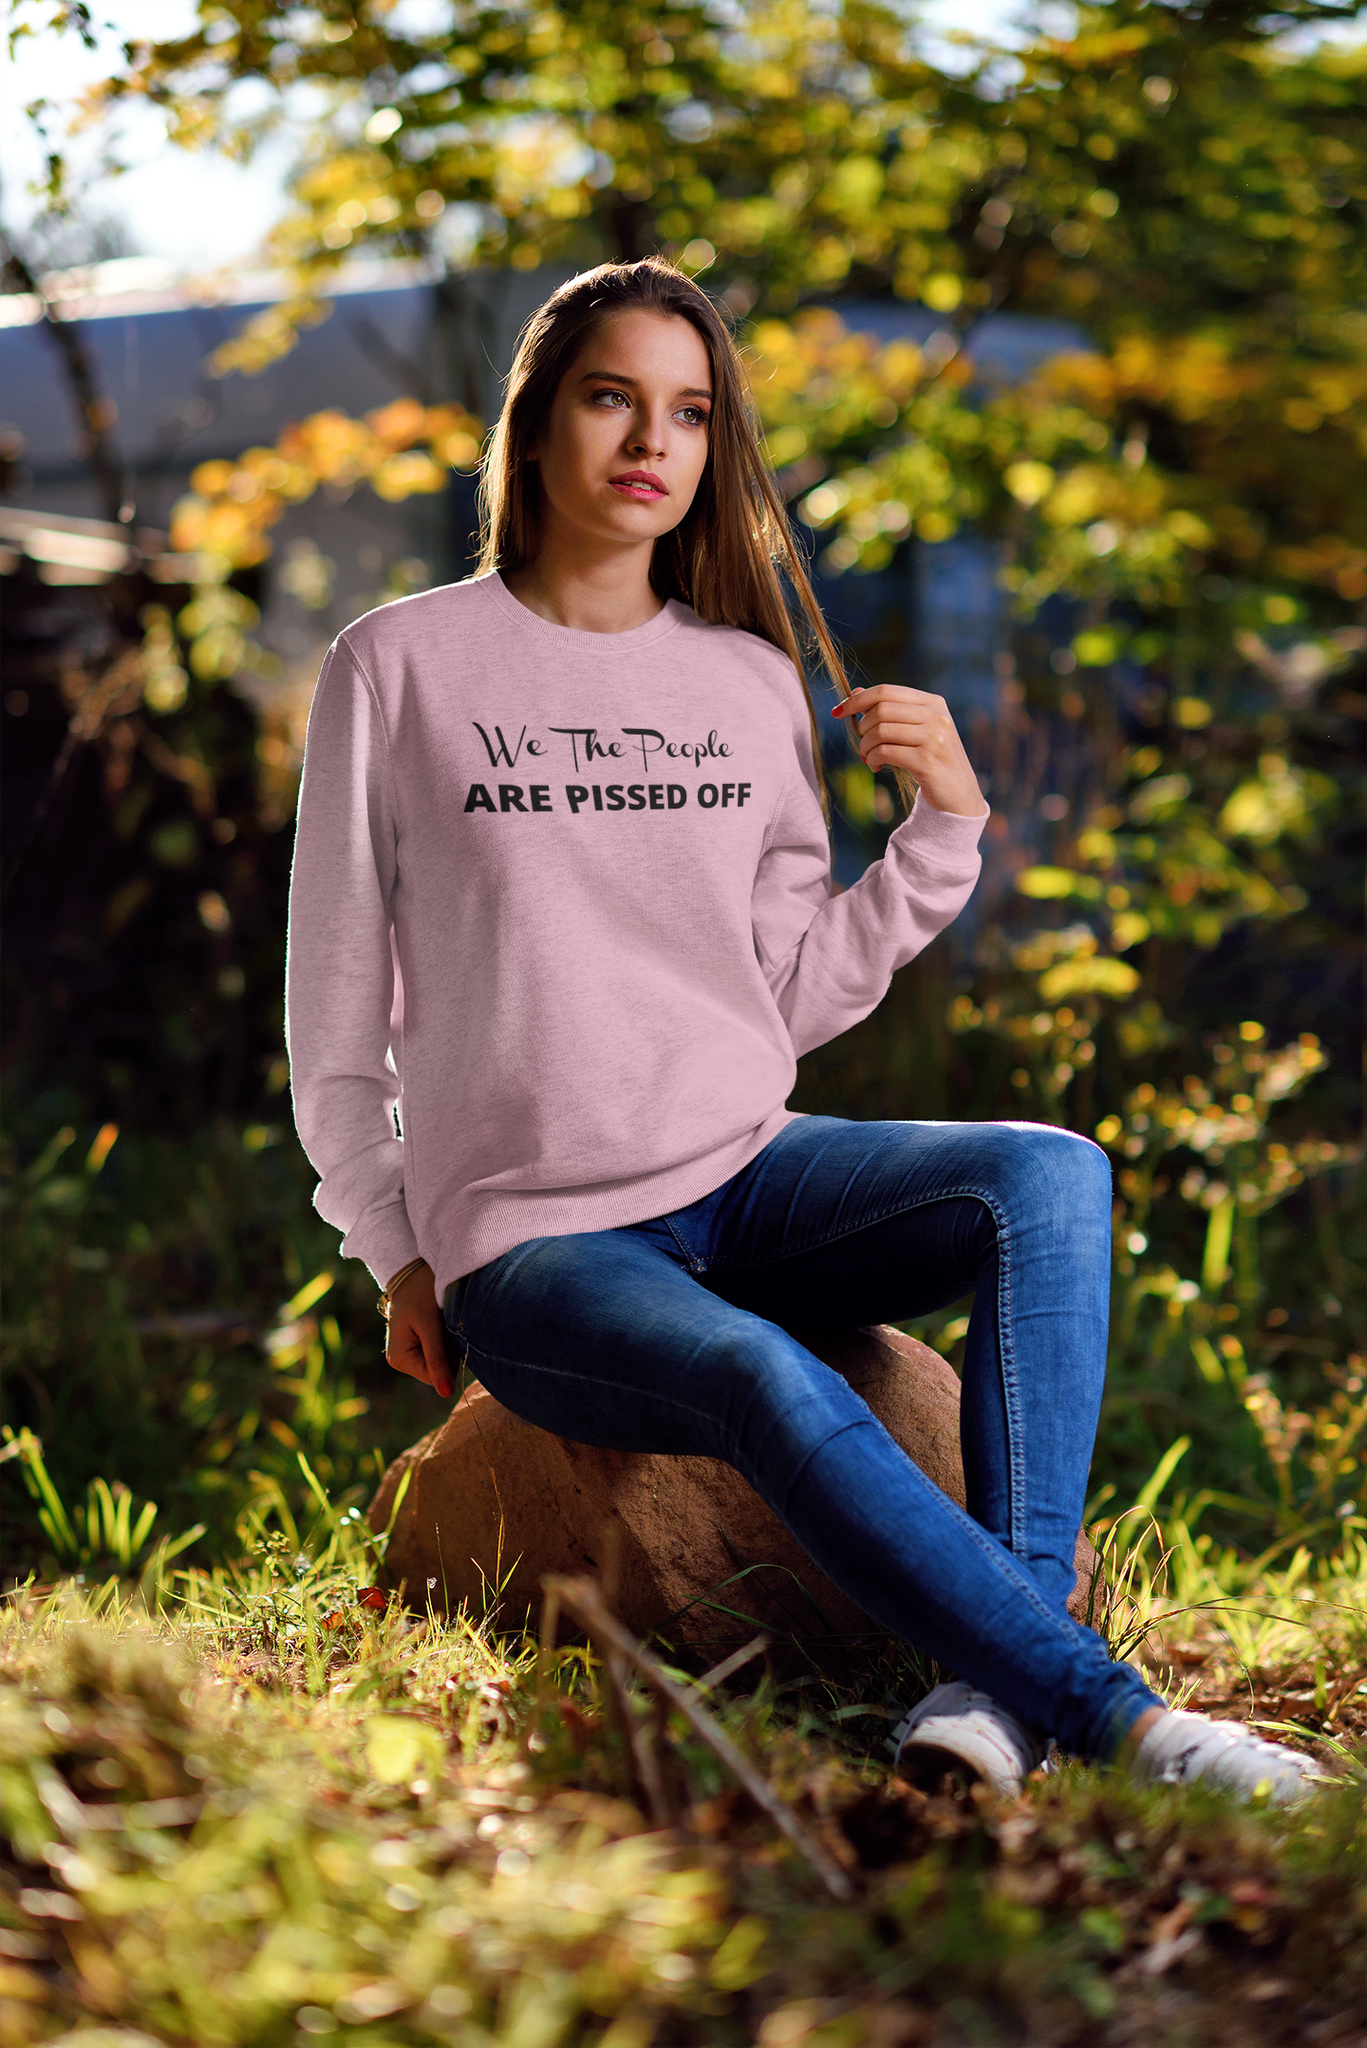 Unisex Sweater, We The People Are Pissed Off, Tröja med tryck We The People